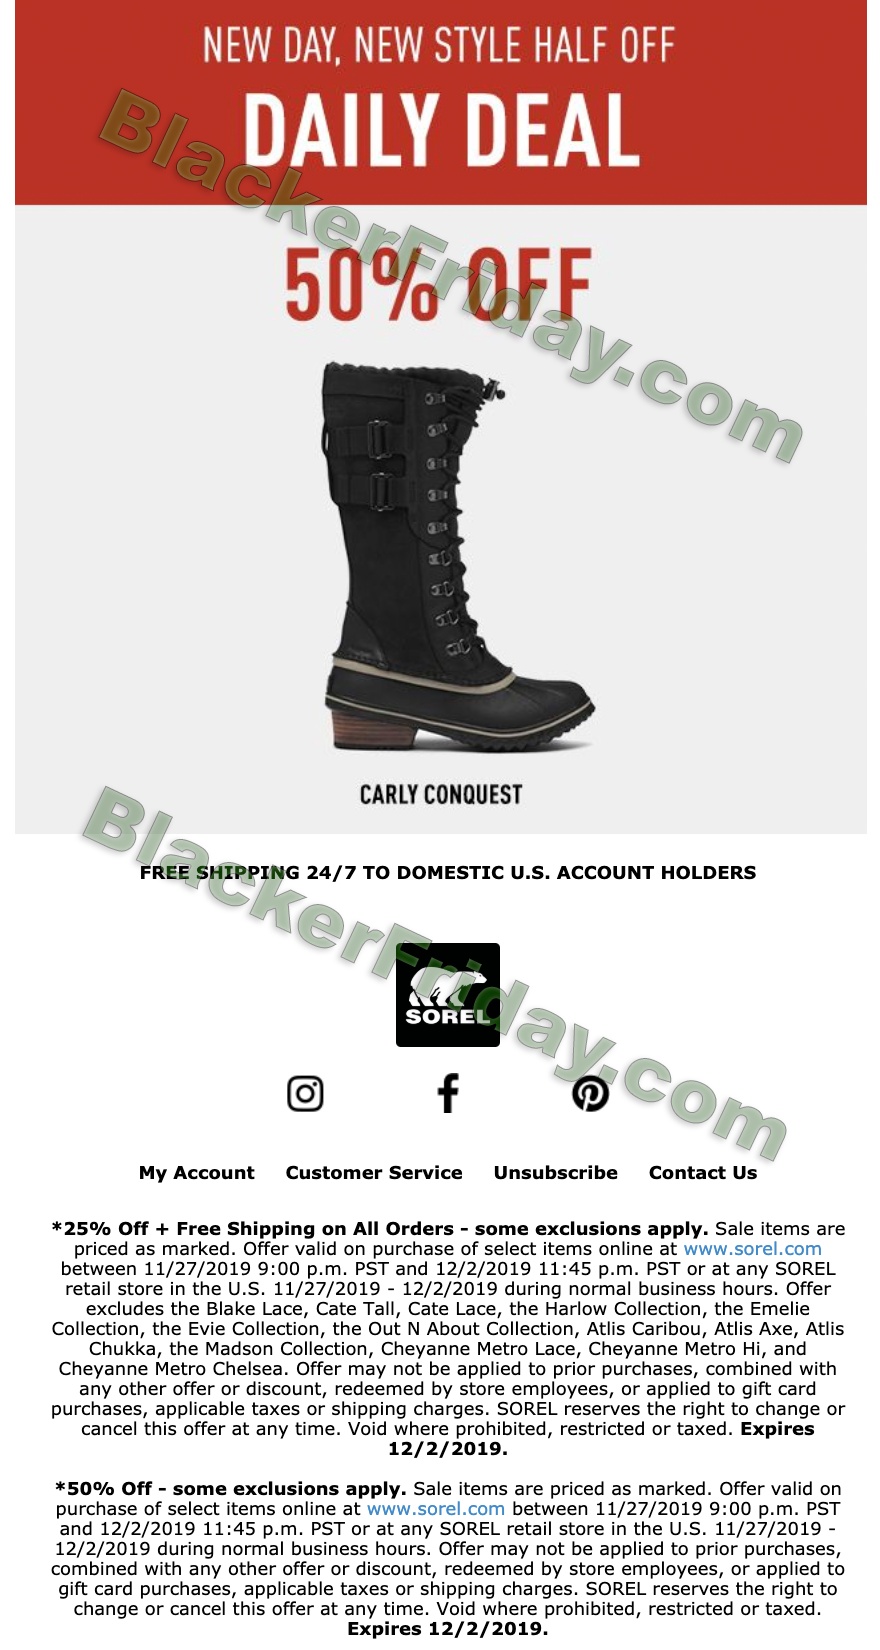 Sorel Black Friday 2020 Sale - What to Expect - Blacker Friday